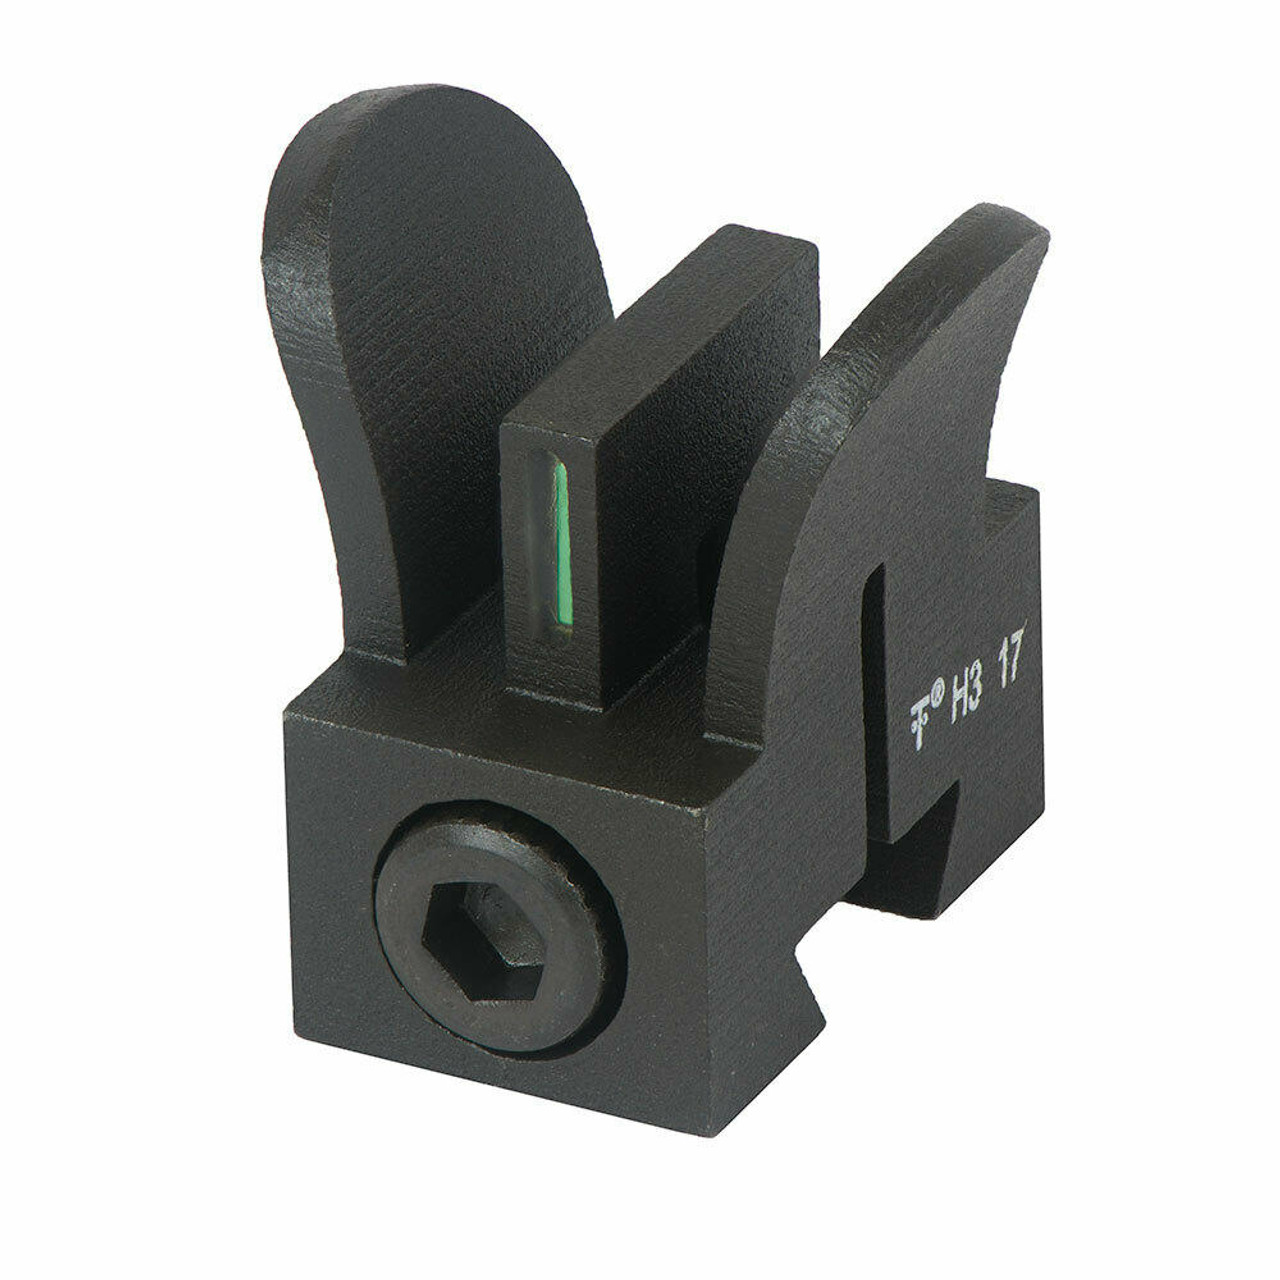 Kensight Kensight Tritium front sight for US M14 rifle and Springfield Armory M1A, green bar insert